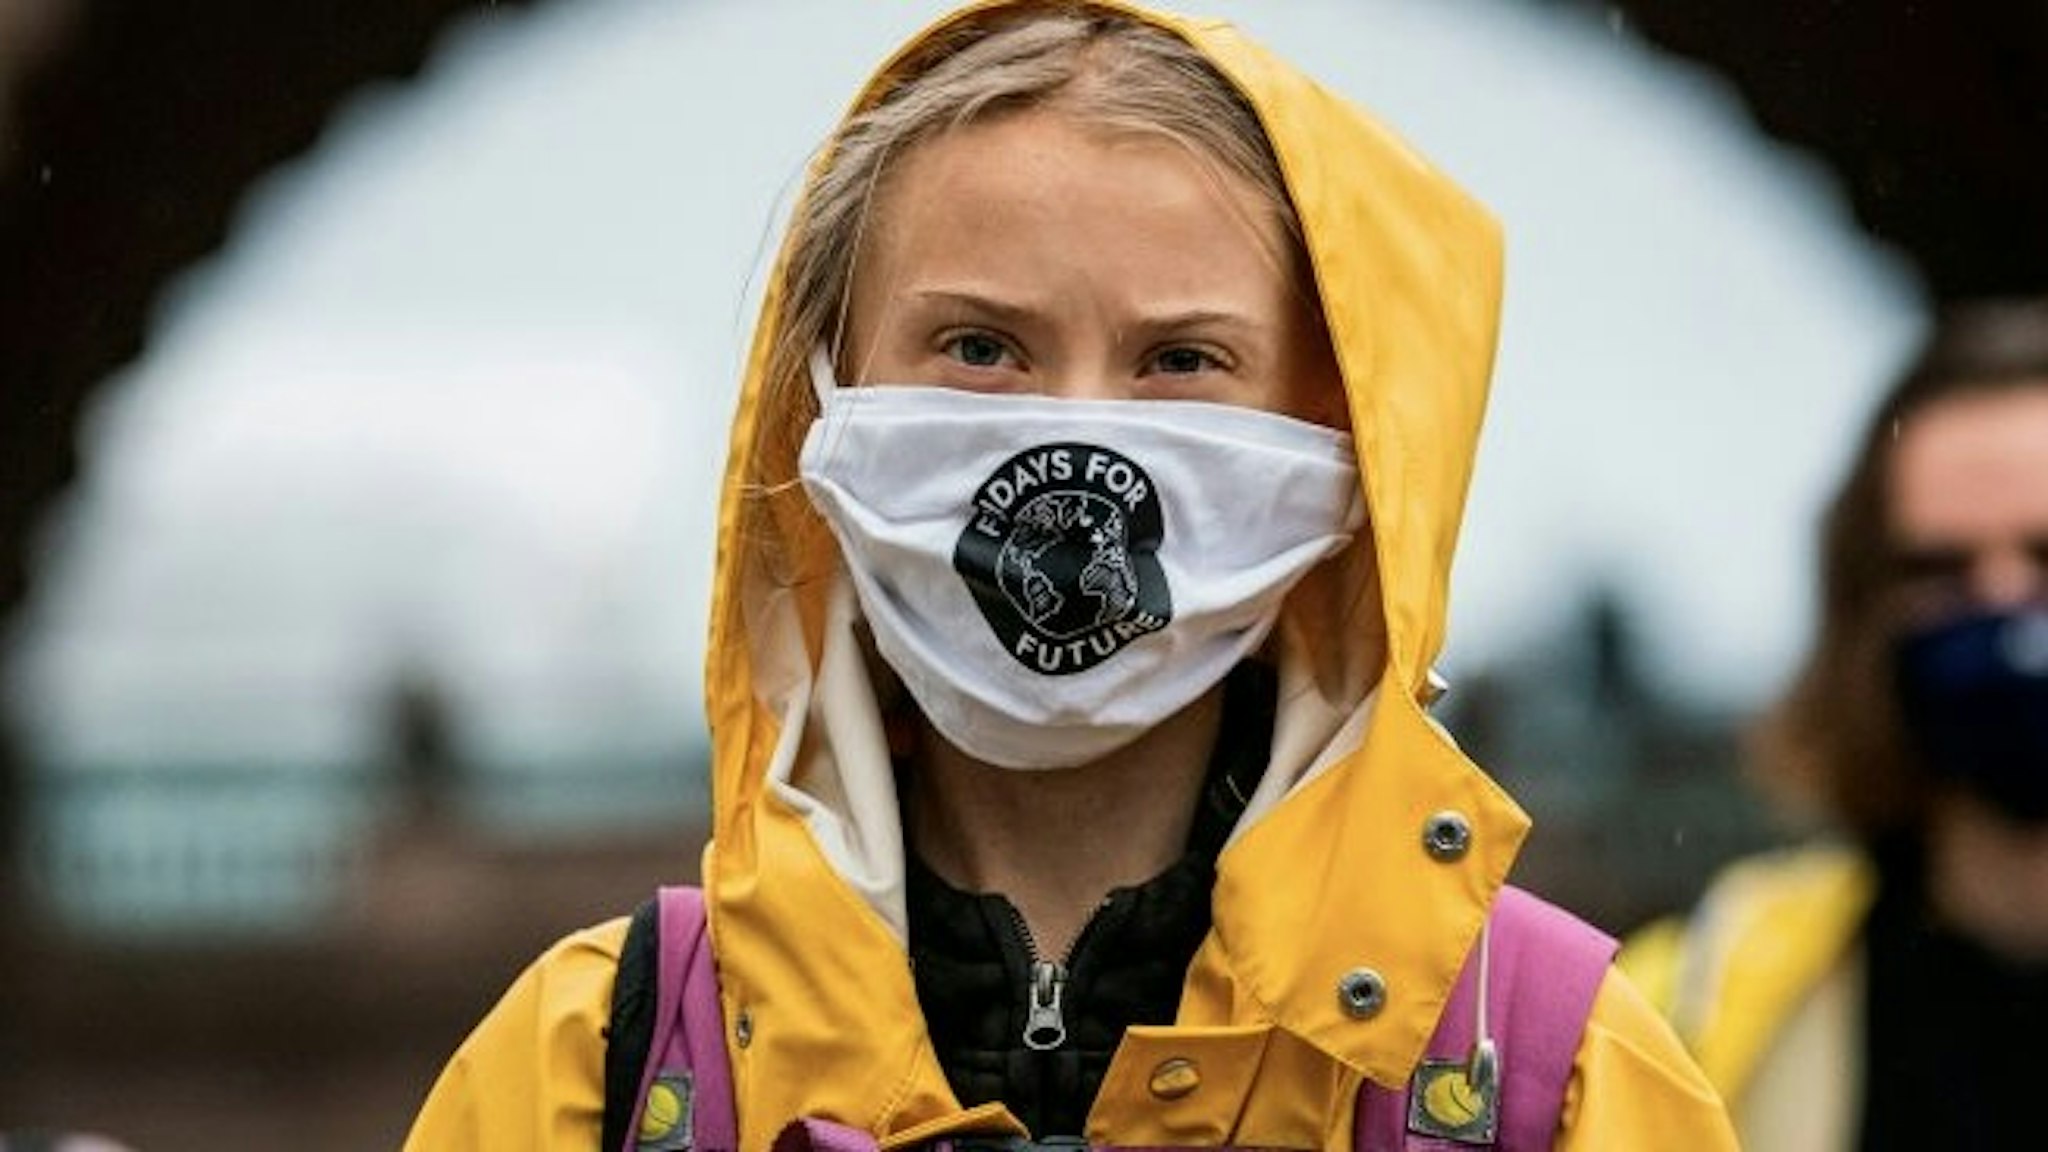 TOPSHOT - Swedish climate activist Greta Thunberg protests during a "Fridays for Future" protest in front of the Swedish Parliament Riksdagen in Stockholm on October 9, 2020. (Photo by Jonathan NACKSTRAND / AFP) (Photo by JONATHAN NACKSTRAND/AFP via Getty Images)